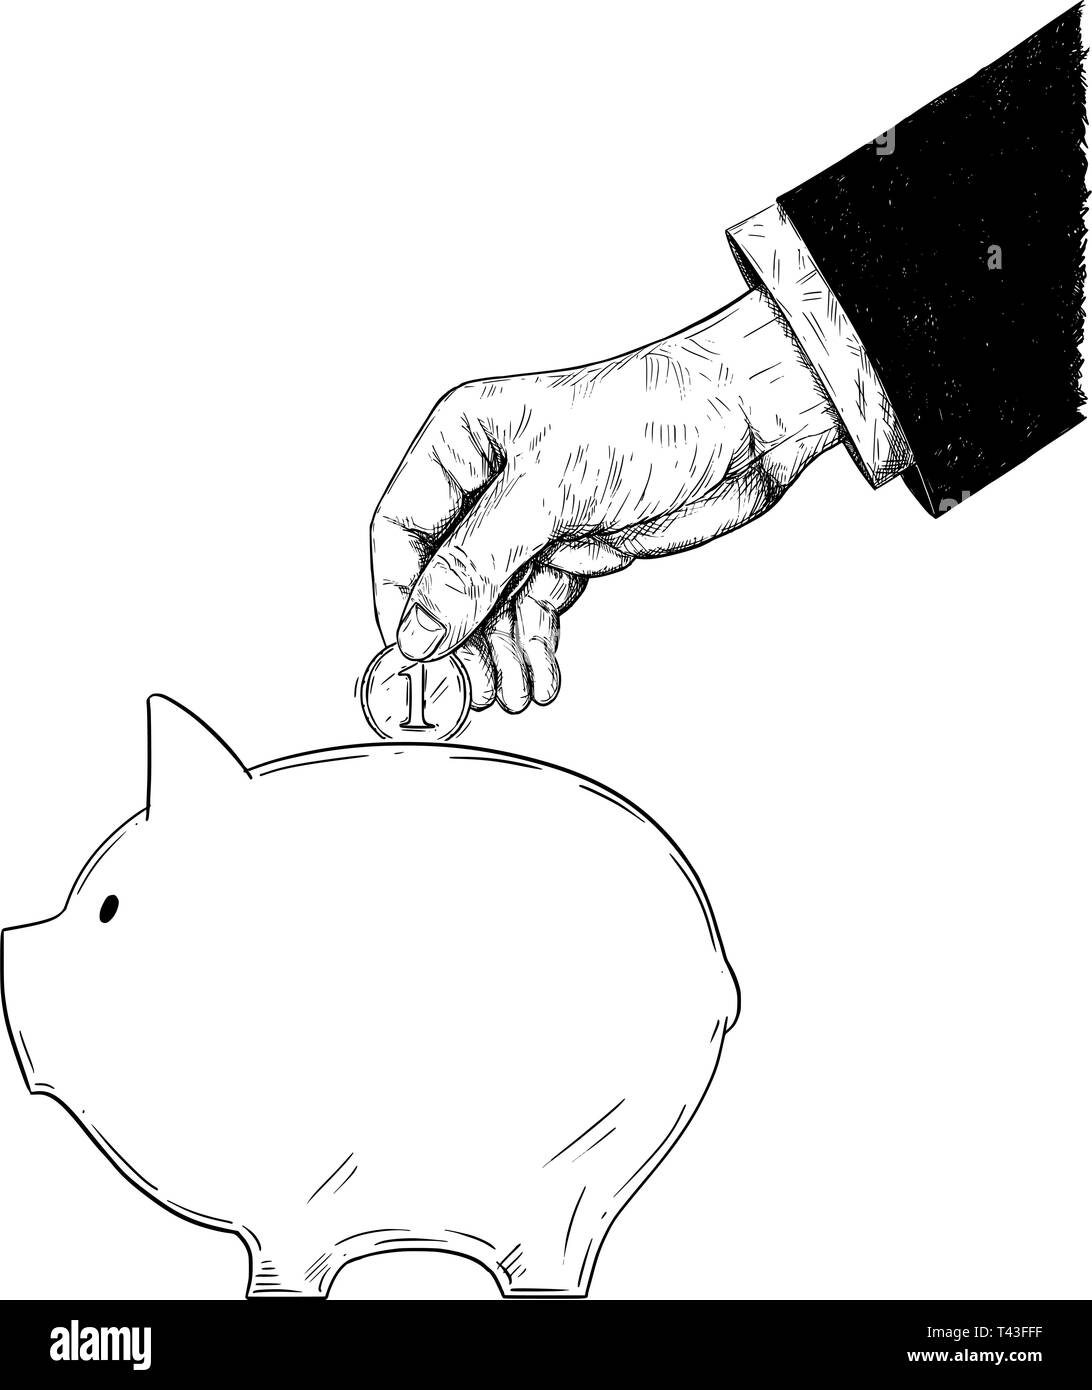 Vector black and white drawing of hand of businessman in suit putting coin in piggy bank. Metaphor of corporate investment and finance. Stock Vector